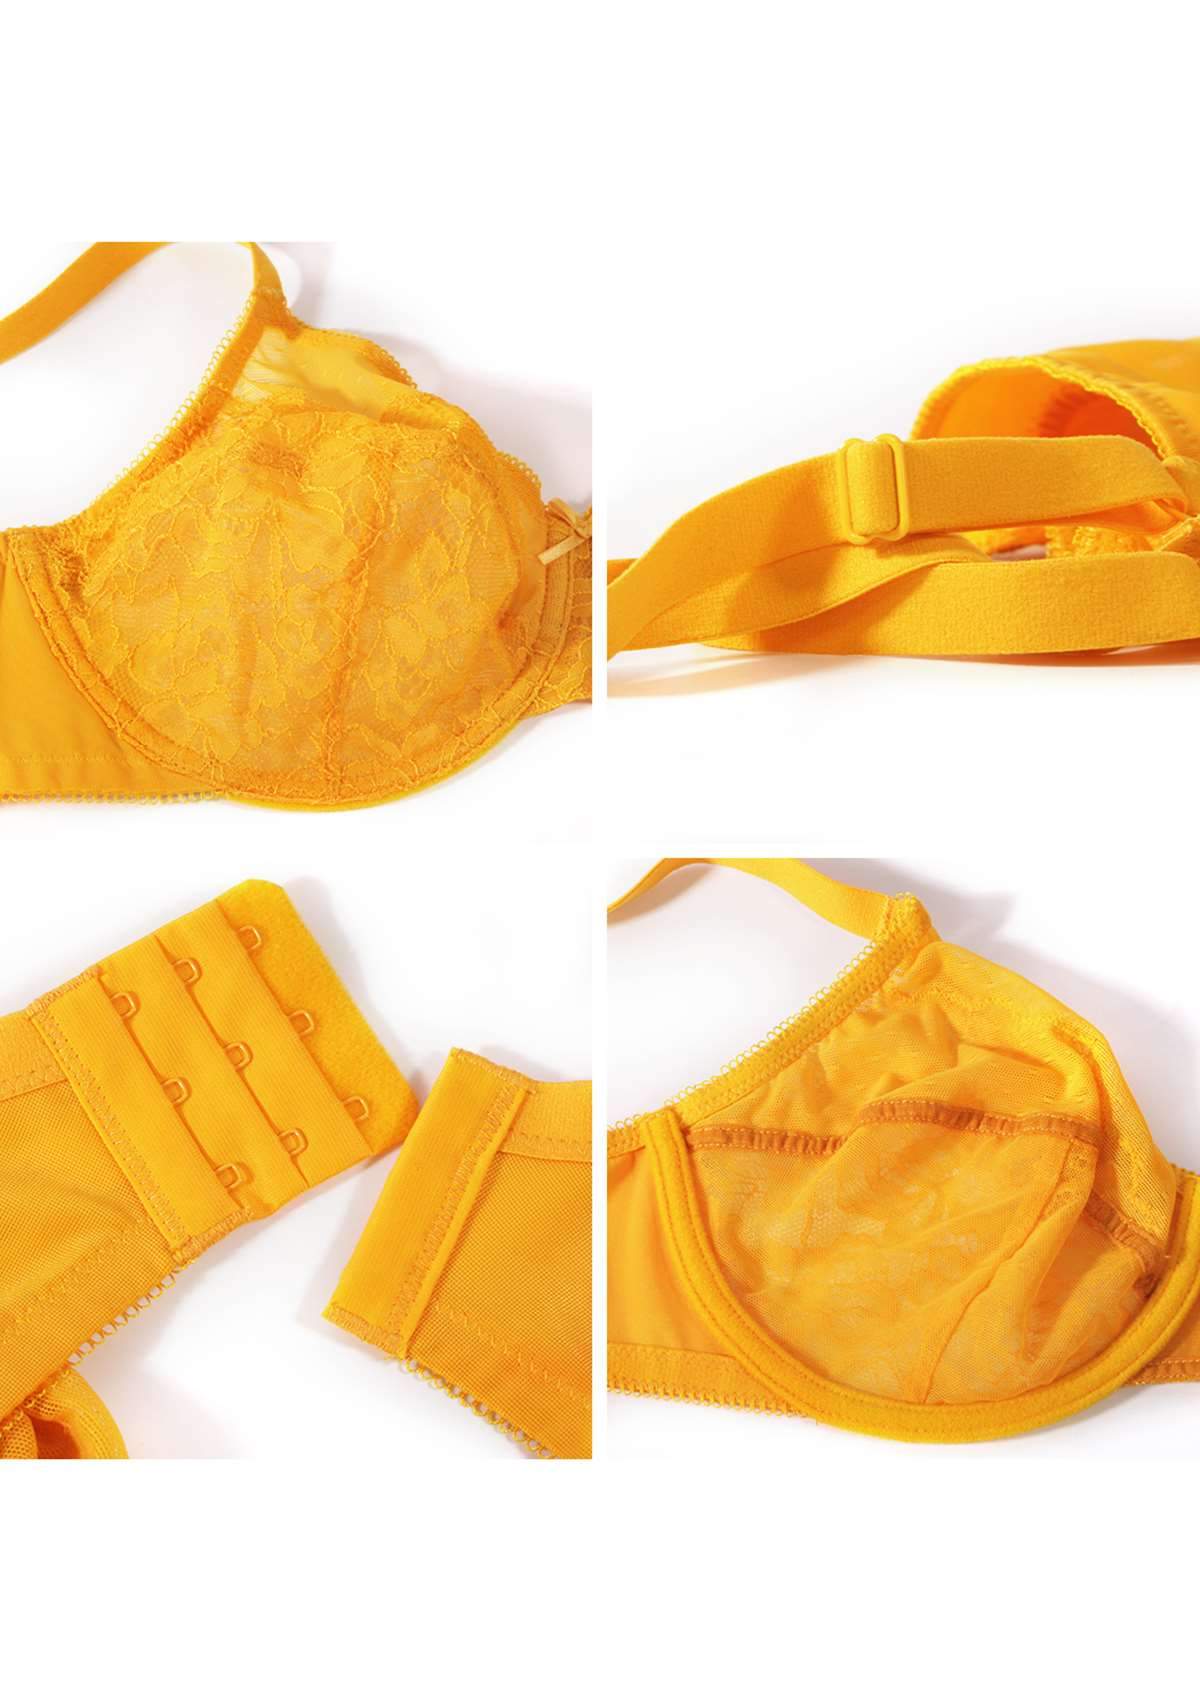 HSIA Enchante Bra And Panty Sets: Unpadded Bra With Back Support - Cadmium Yellow / 36 / C